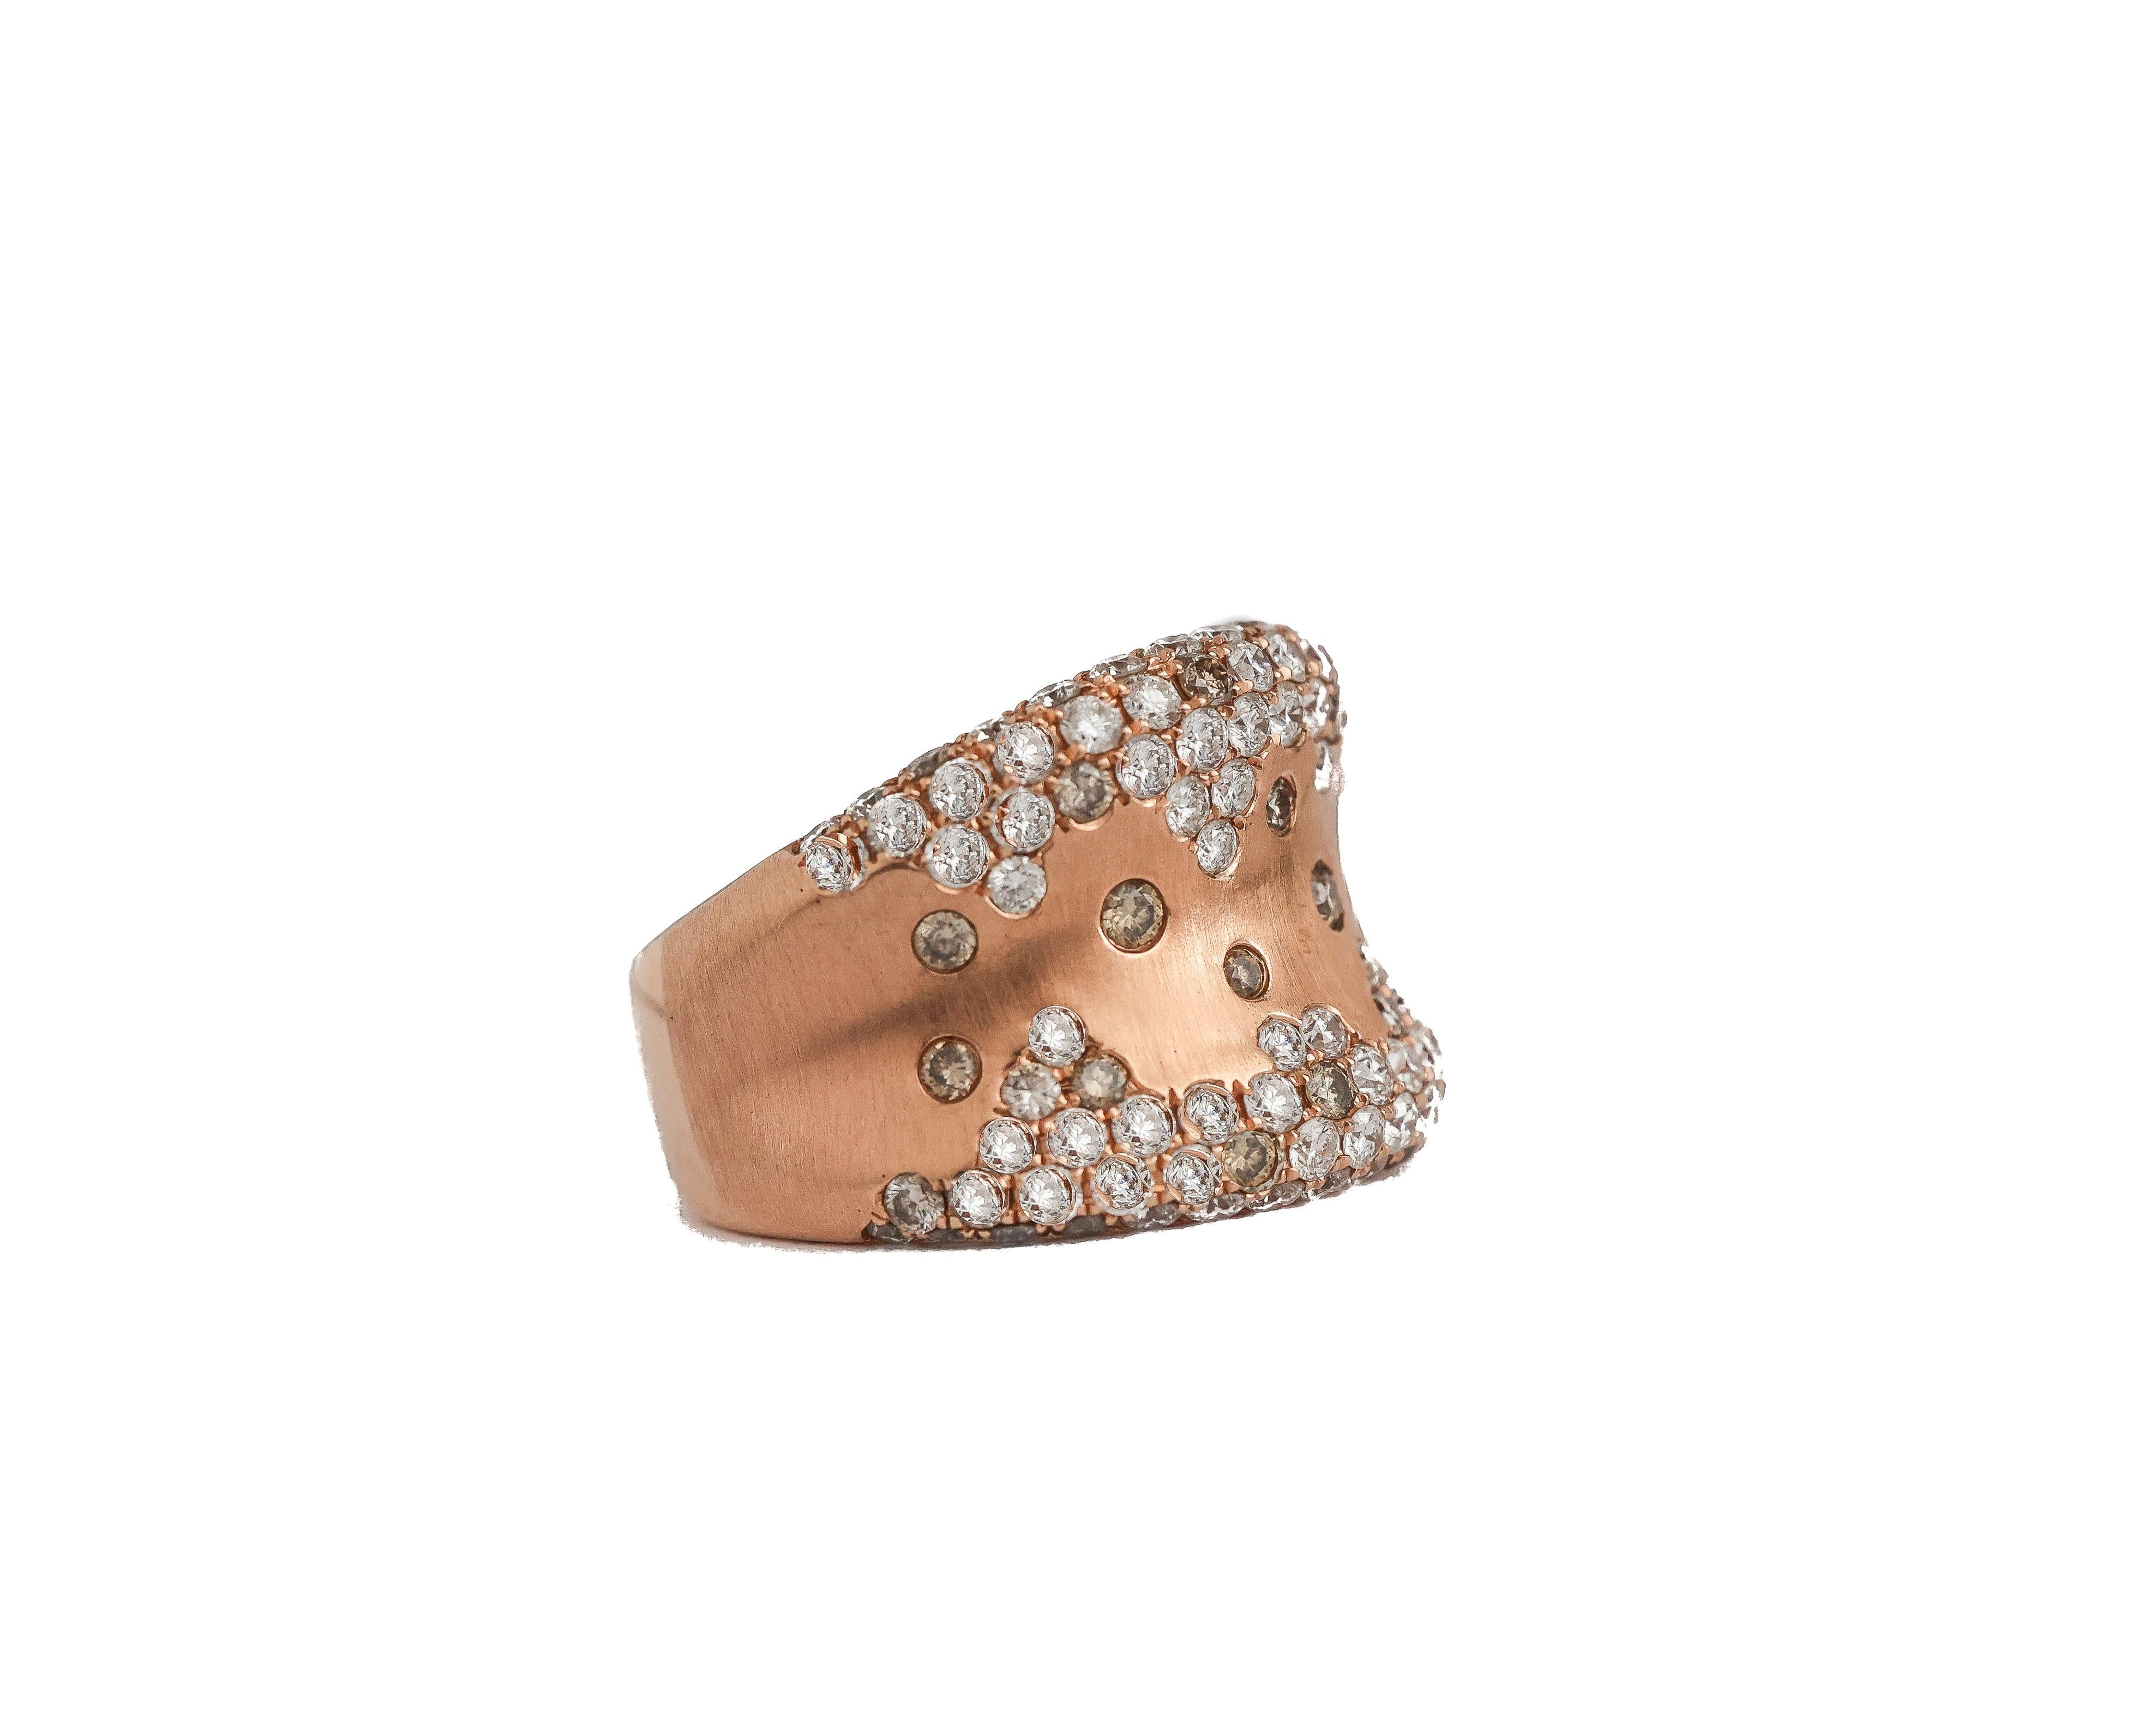 Item Details:
Metal Type: 18 Karat Rose Gold
Weight: 15 grams
Size: 7 (resizable)

Diamond Details:
Cut: Round Brilliant
Carat: 5.25 Carat Total Weight
Color: H-K
Clarity: VS

1990s, very unique rose gold diamond cocktail ring. High contrast rose